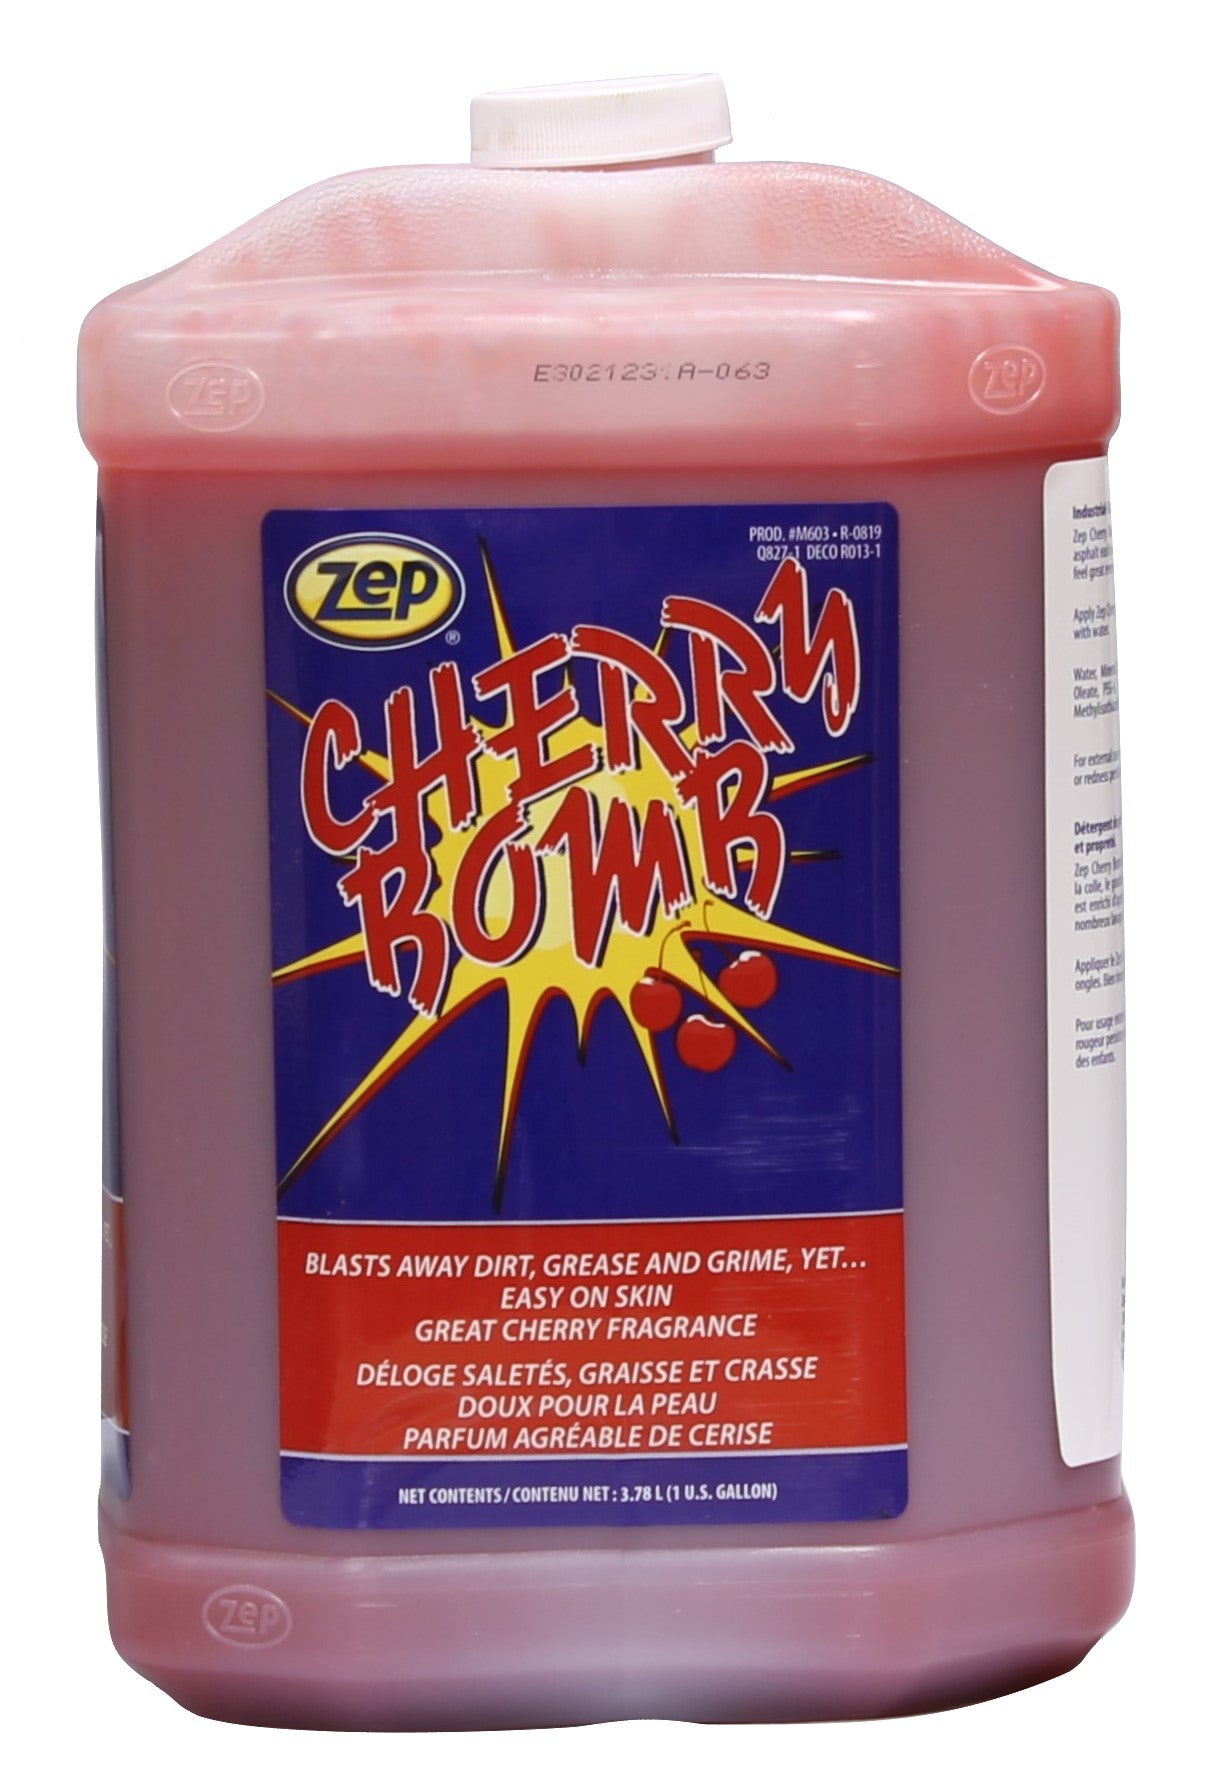 4) 1 GALLON JUGS OF ZEP CHERRY BOMB HAND CLEANER, Online Auction Results